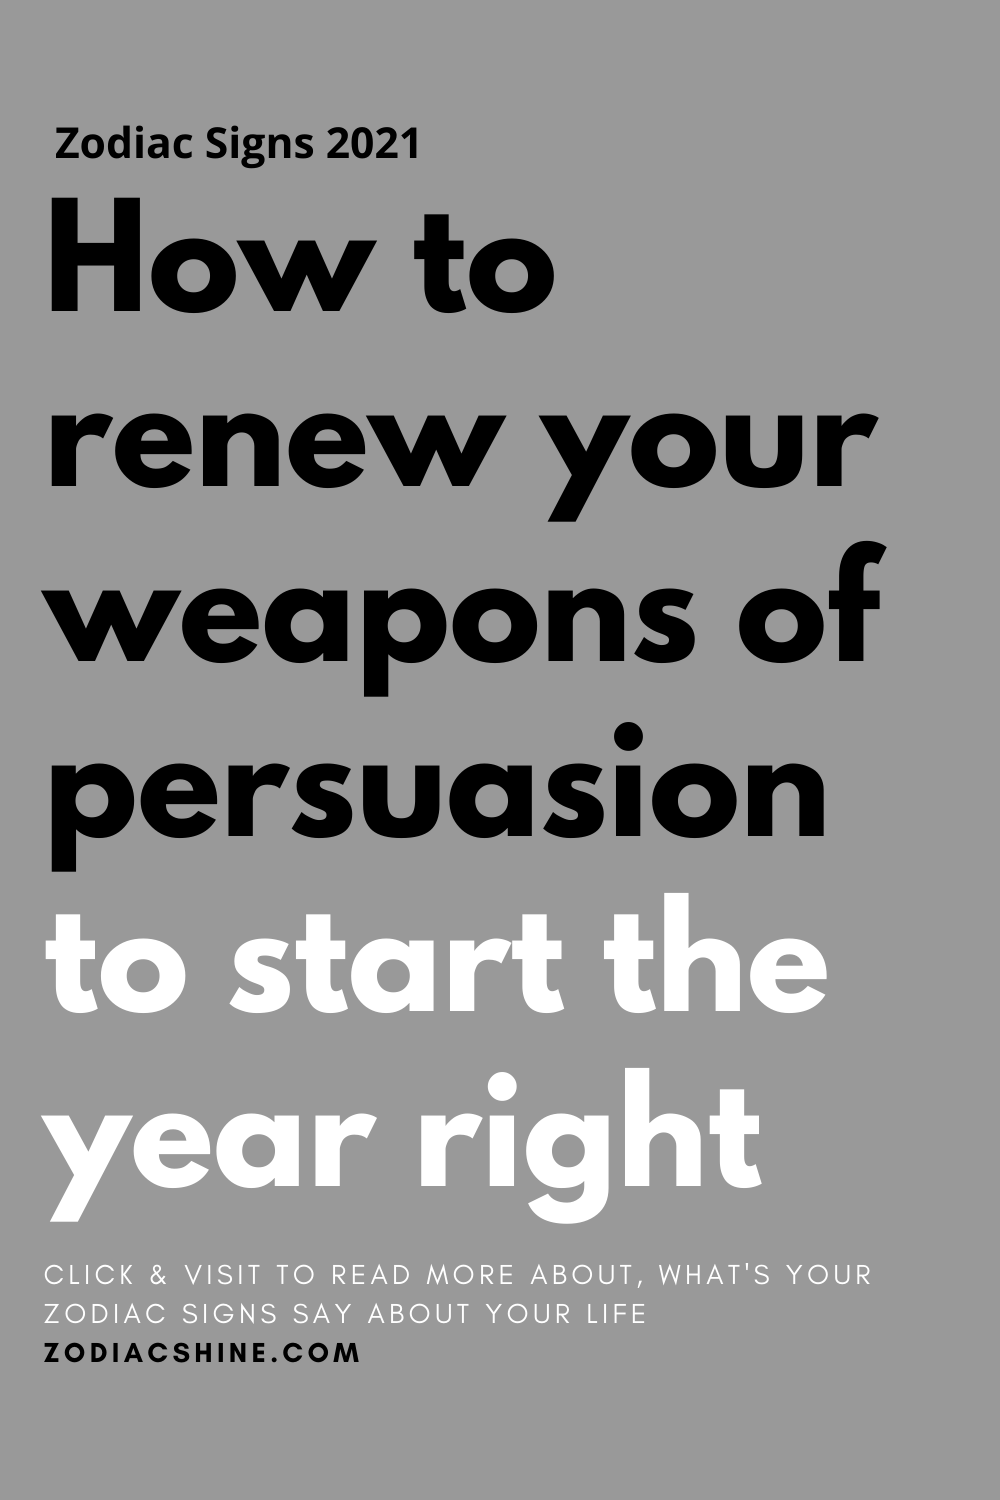 How to renew your weapons of persuasion to start the year right